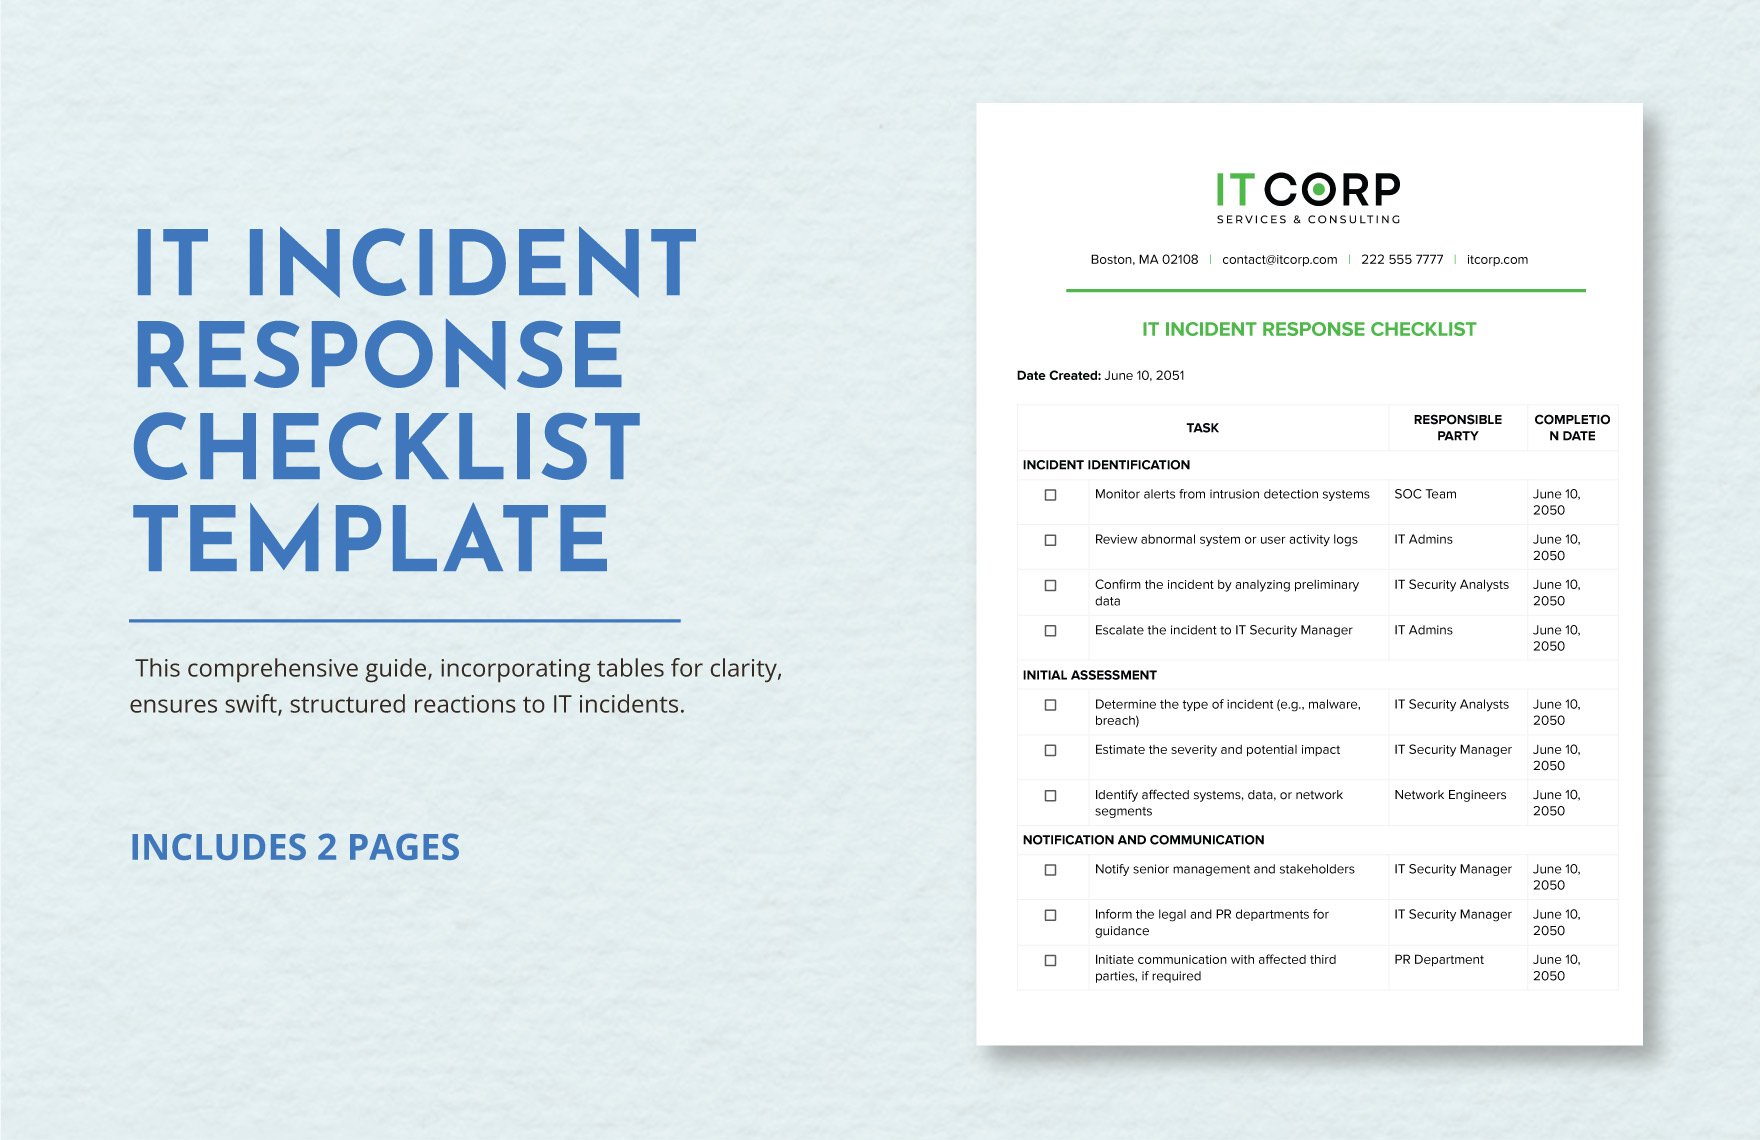 IT Incident Response Checklist Template in Word PDF Google Docs